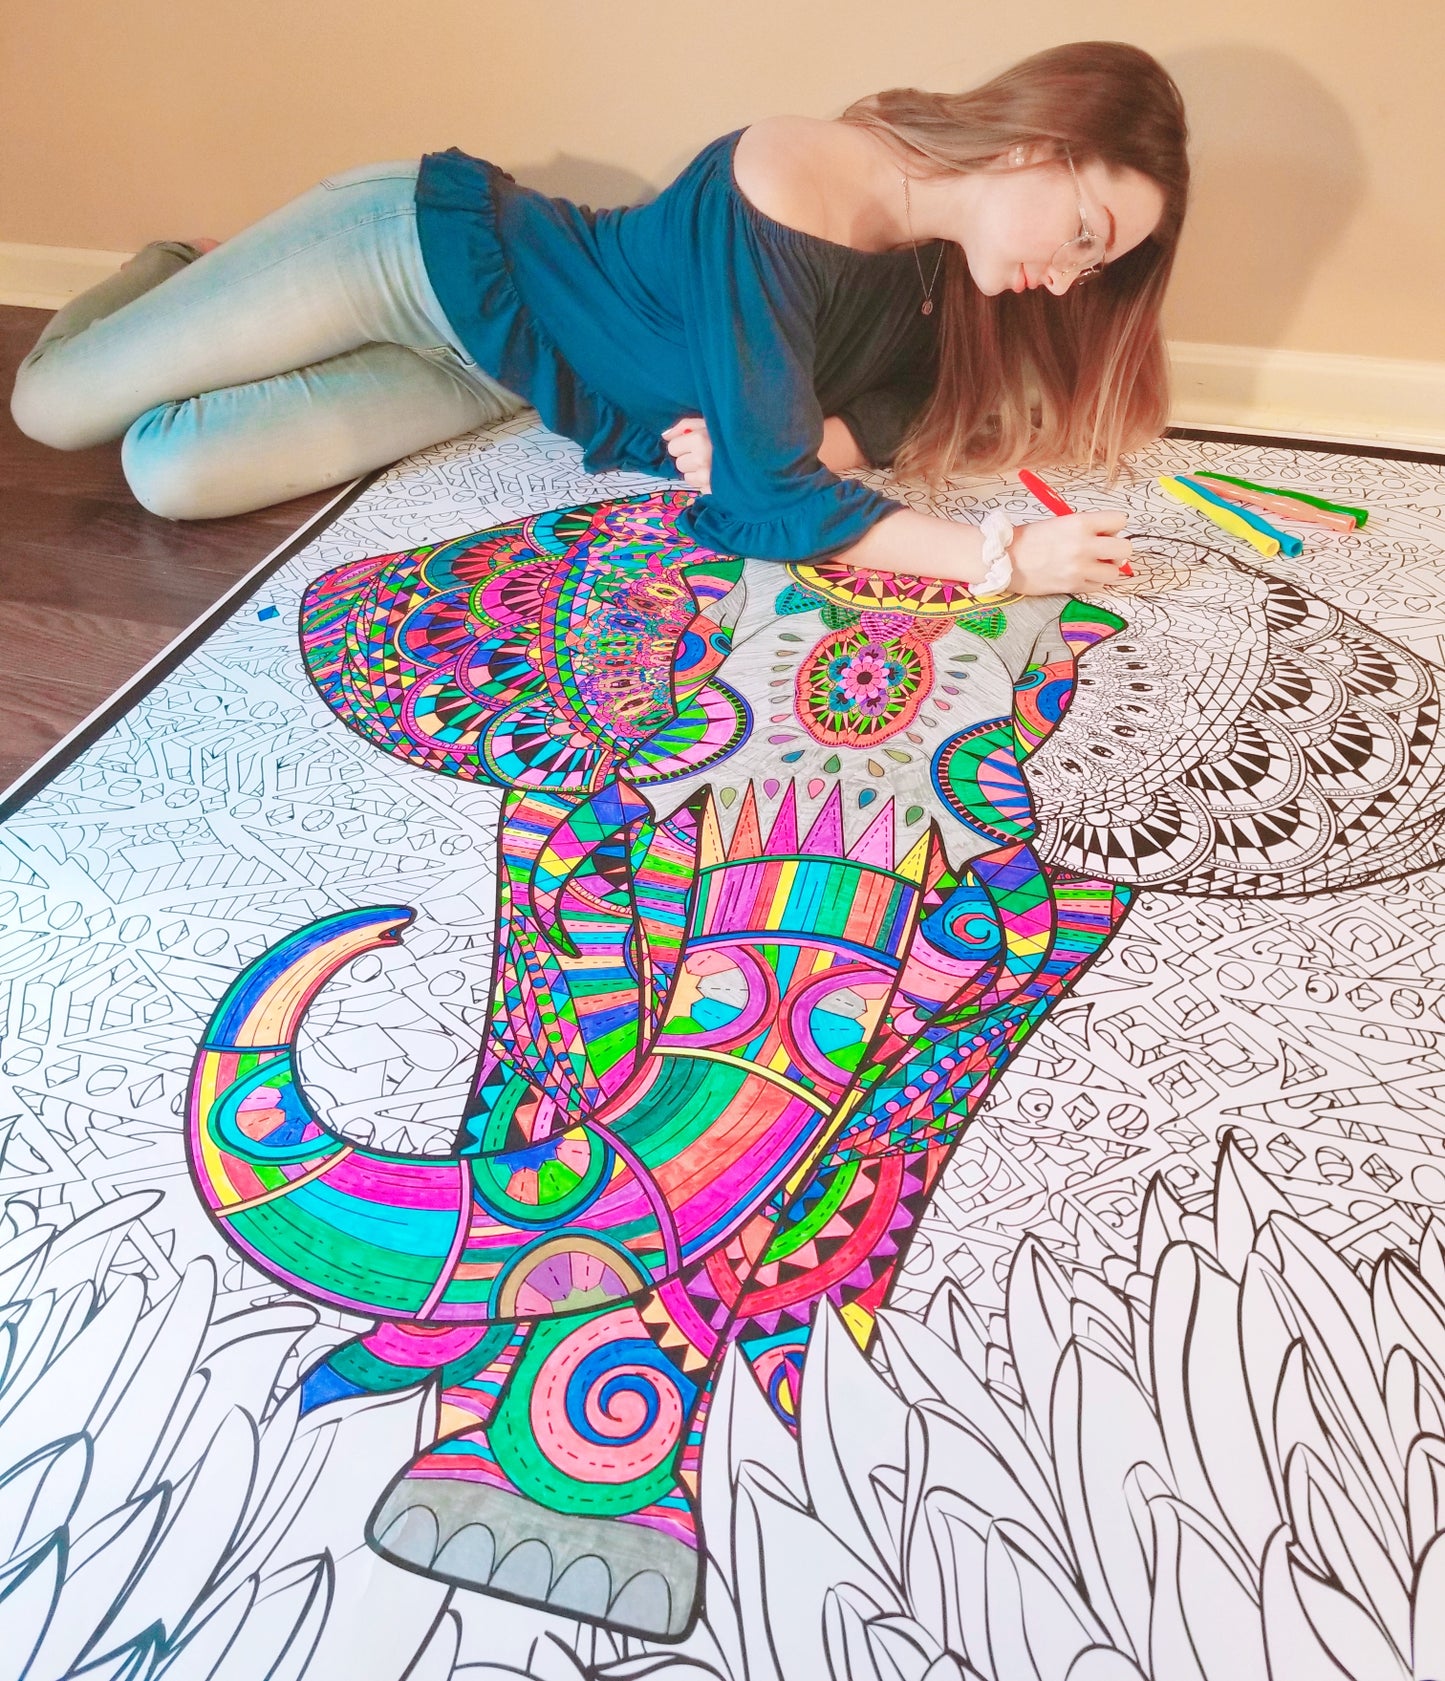 Elephant Personalized Giant Coloring Poster 46"x60"